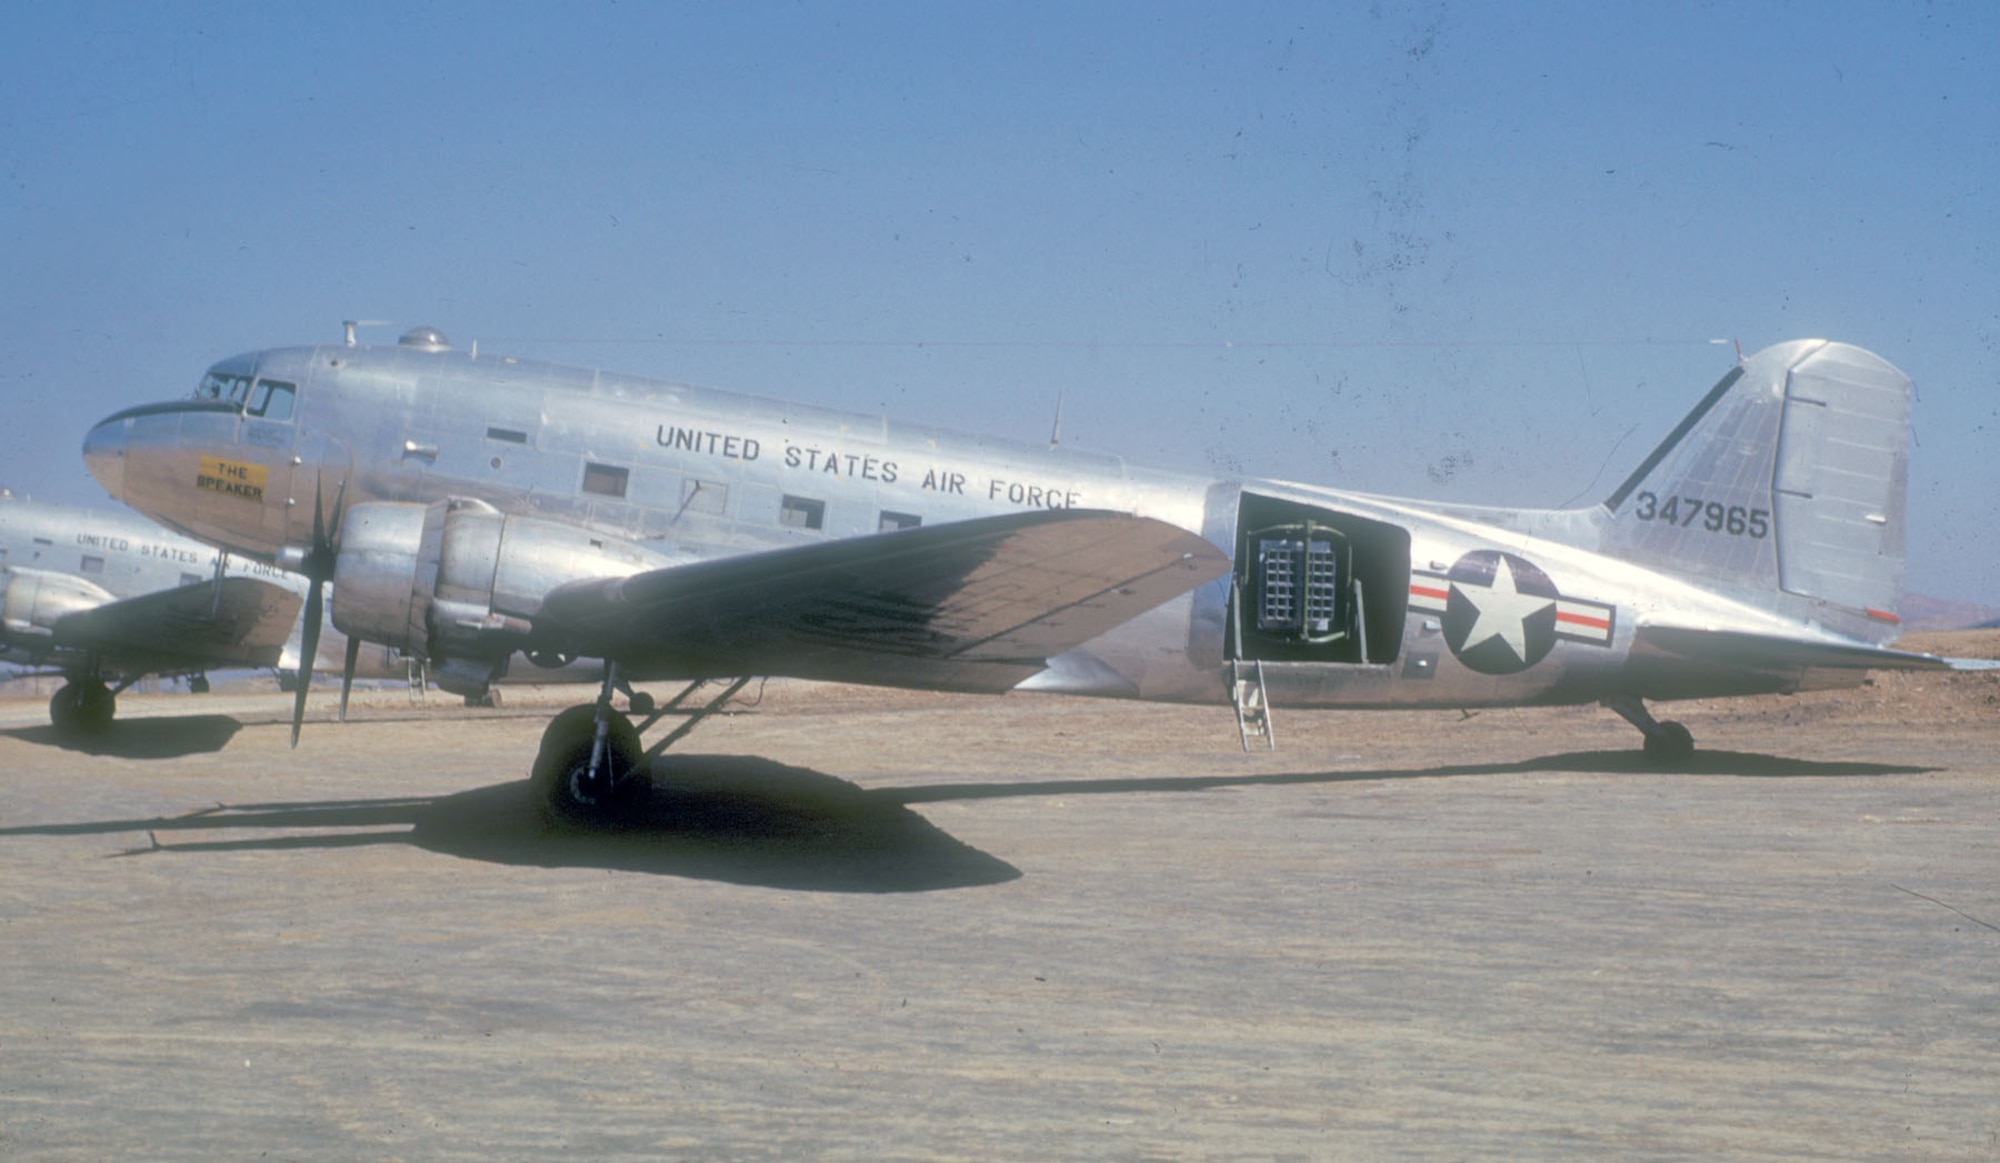 One of two loudspeaker-equipped C-47s. This one was named "The Speaker" and the other "The Voice." (U.S. Air Force photo)